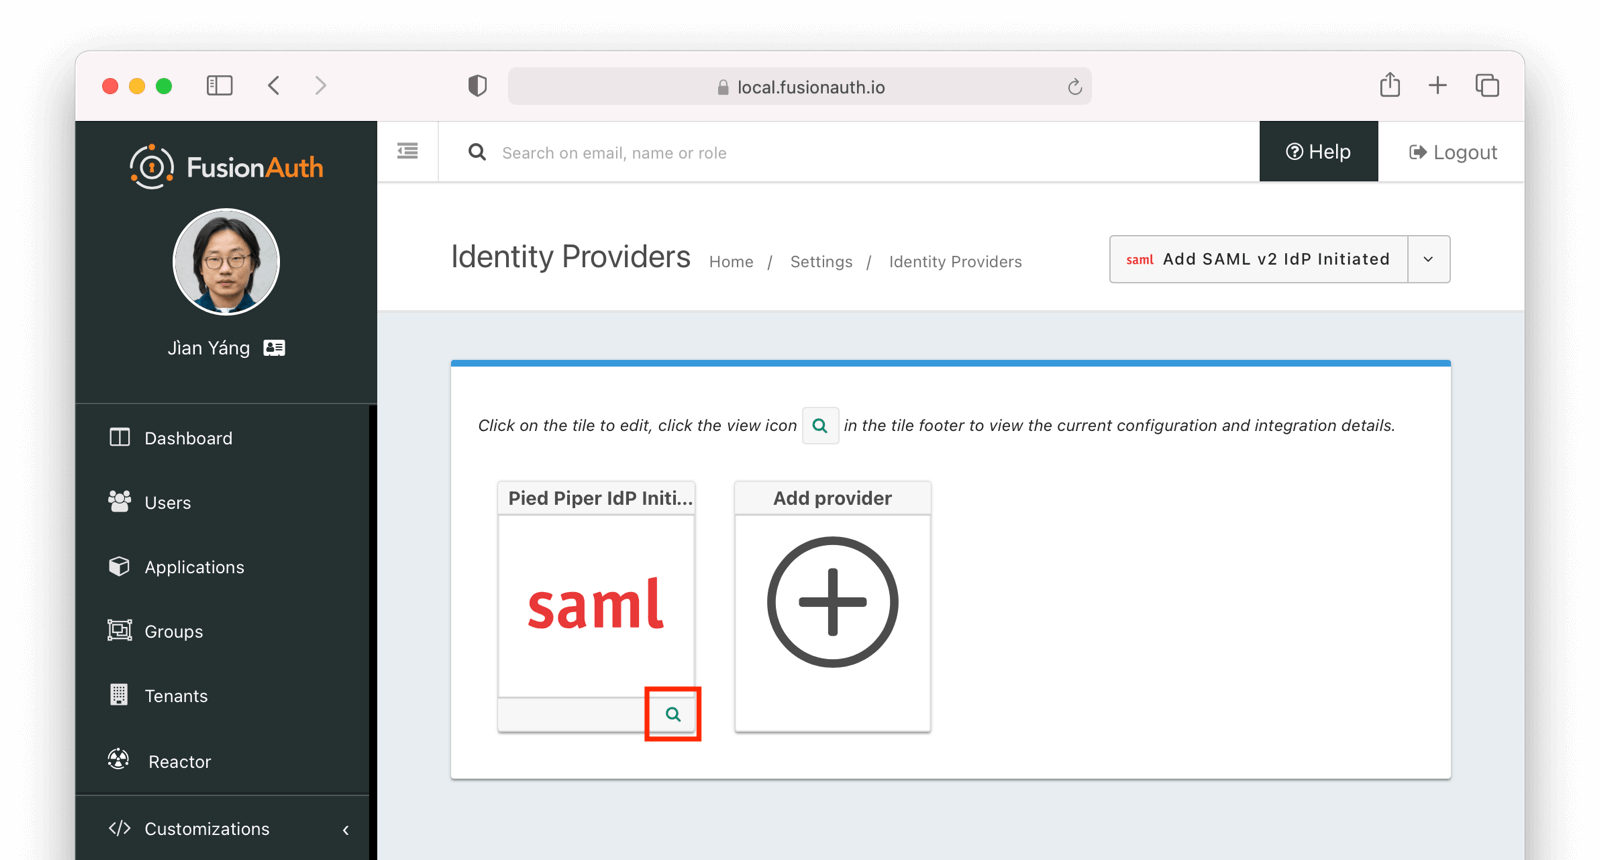 View the identity provider list